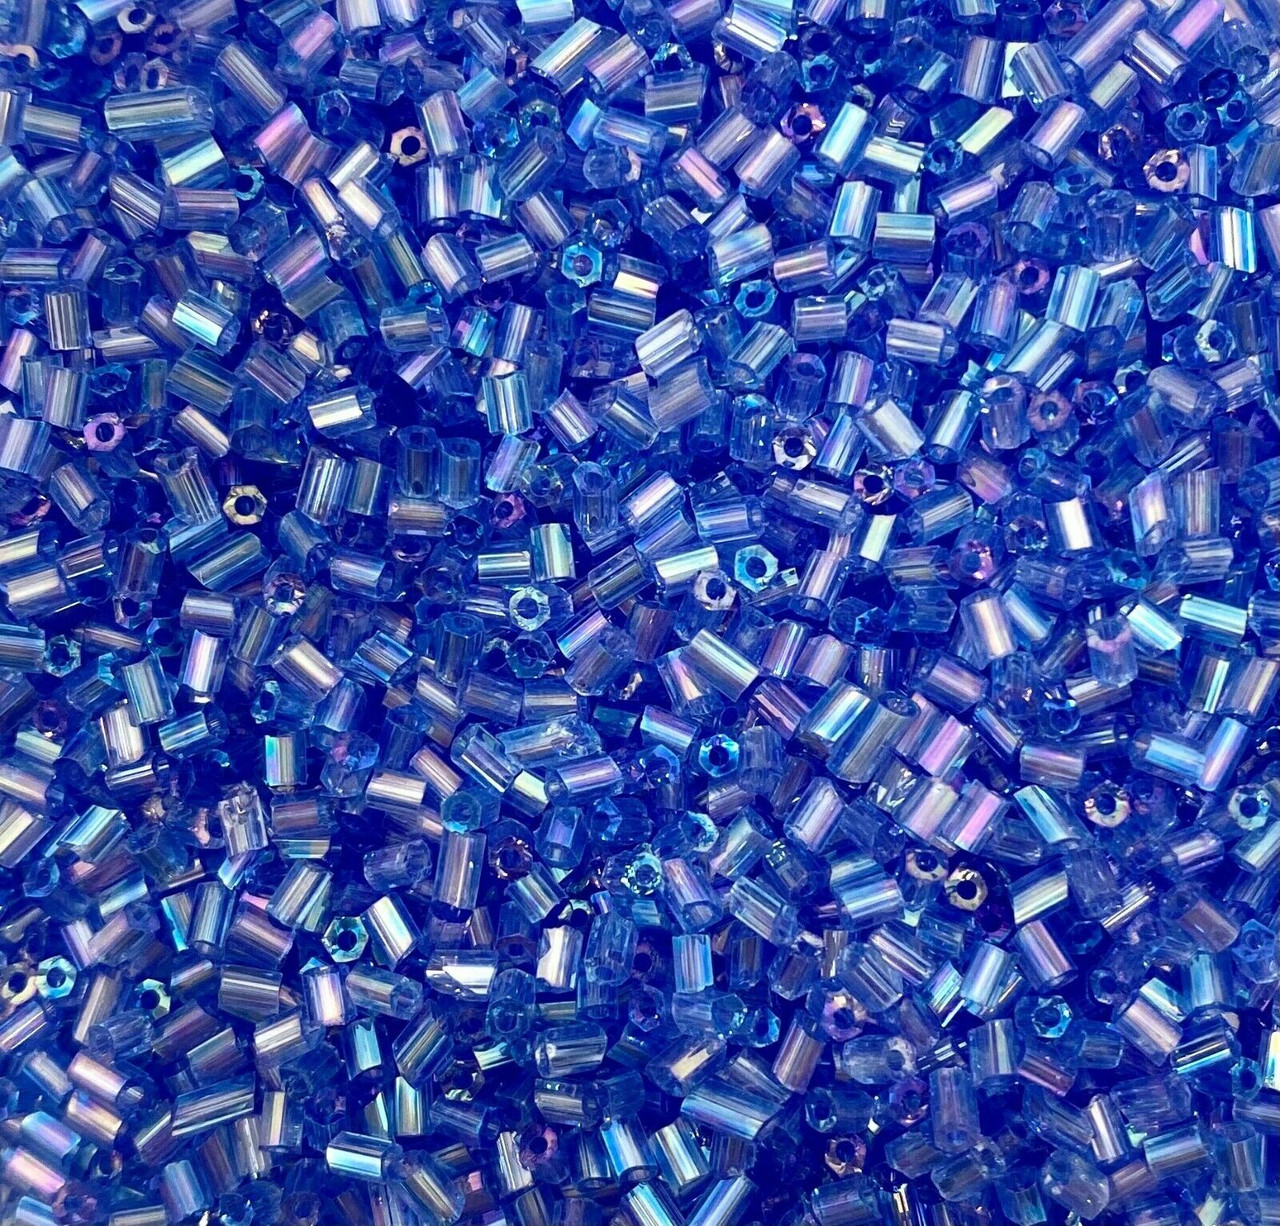 50g glass HEX seed beads - Mid Blue Rainbow, size 11/0 (approx 2mm)